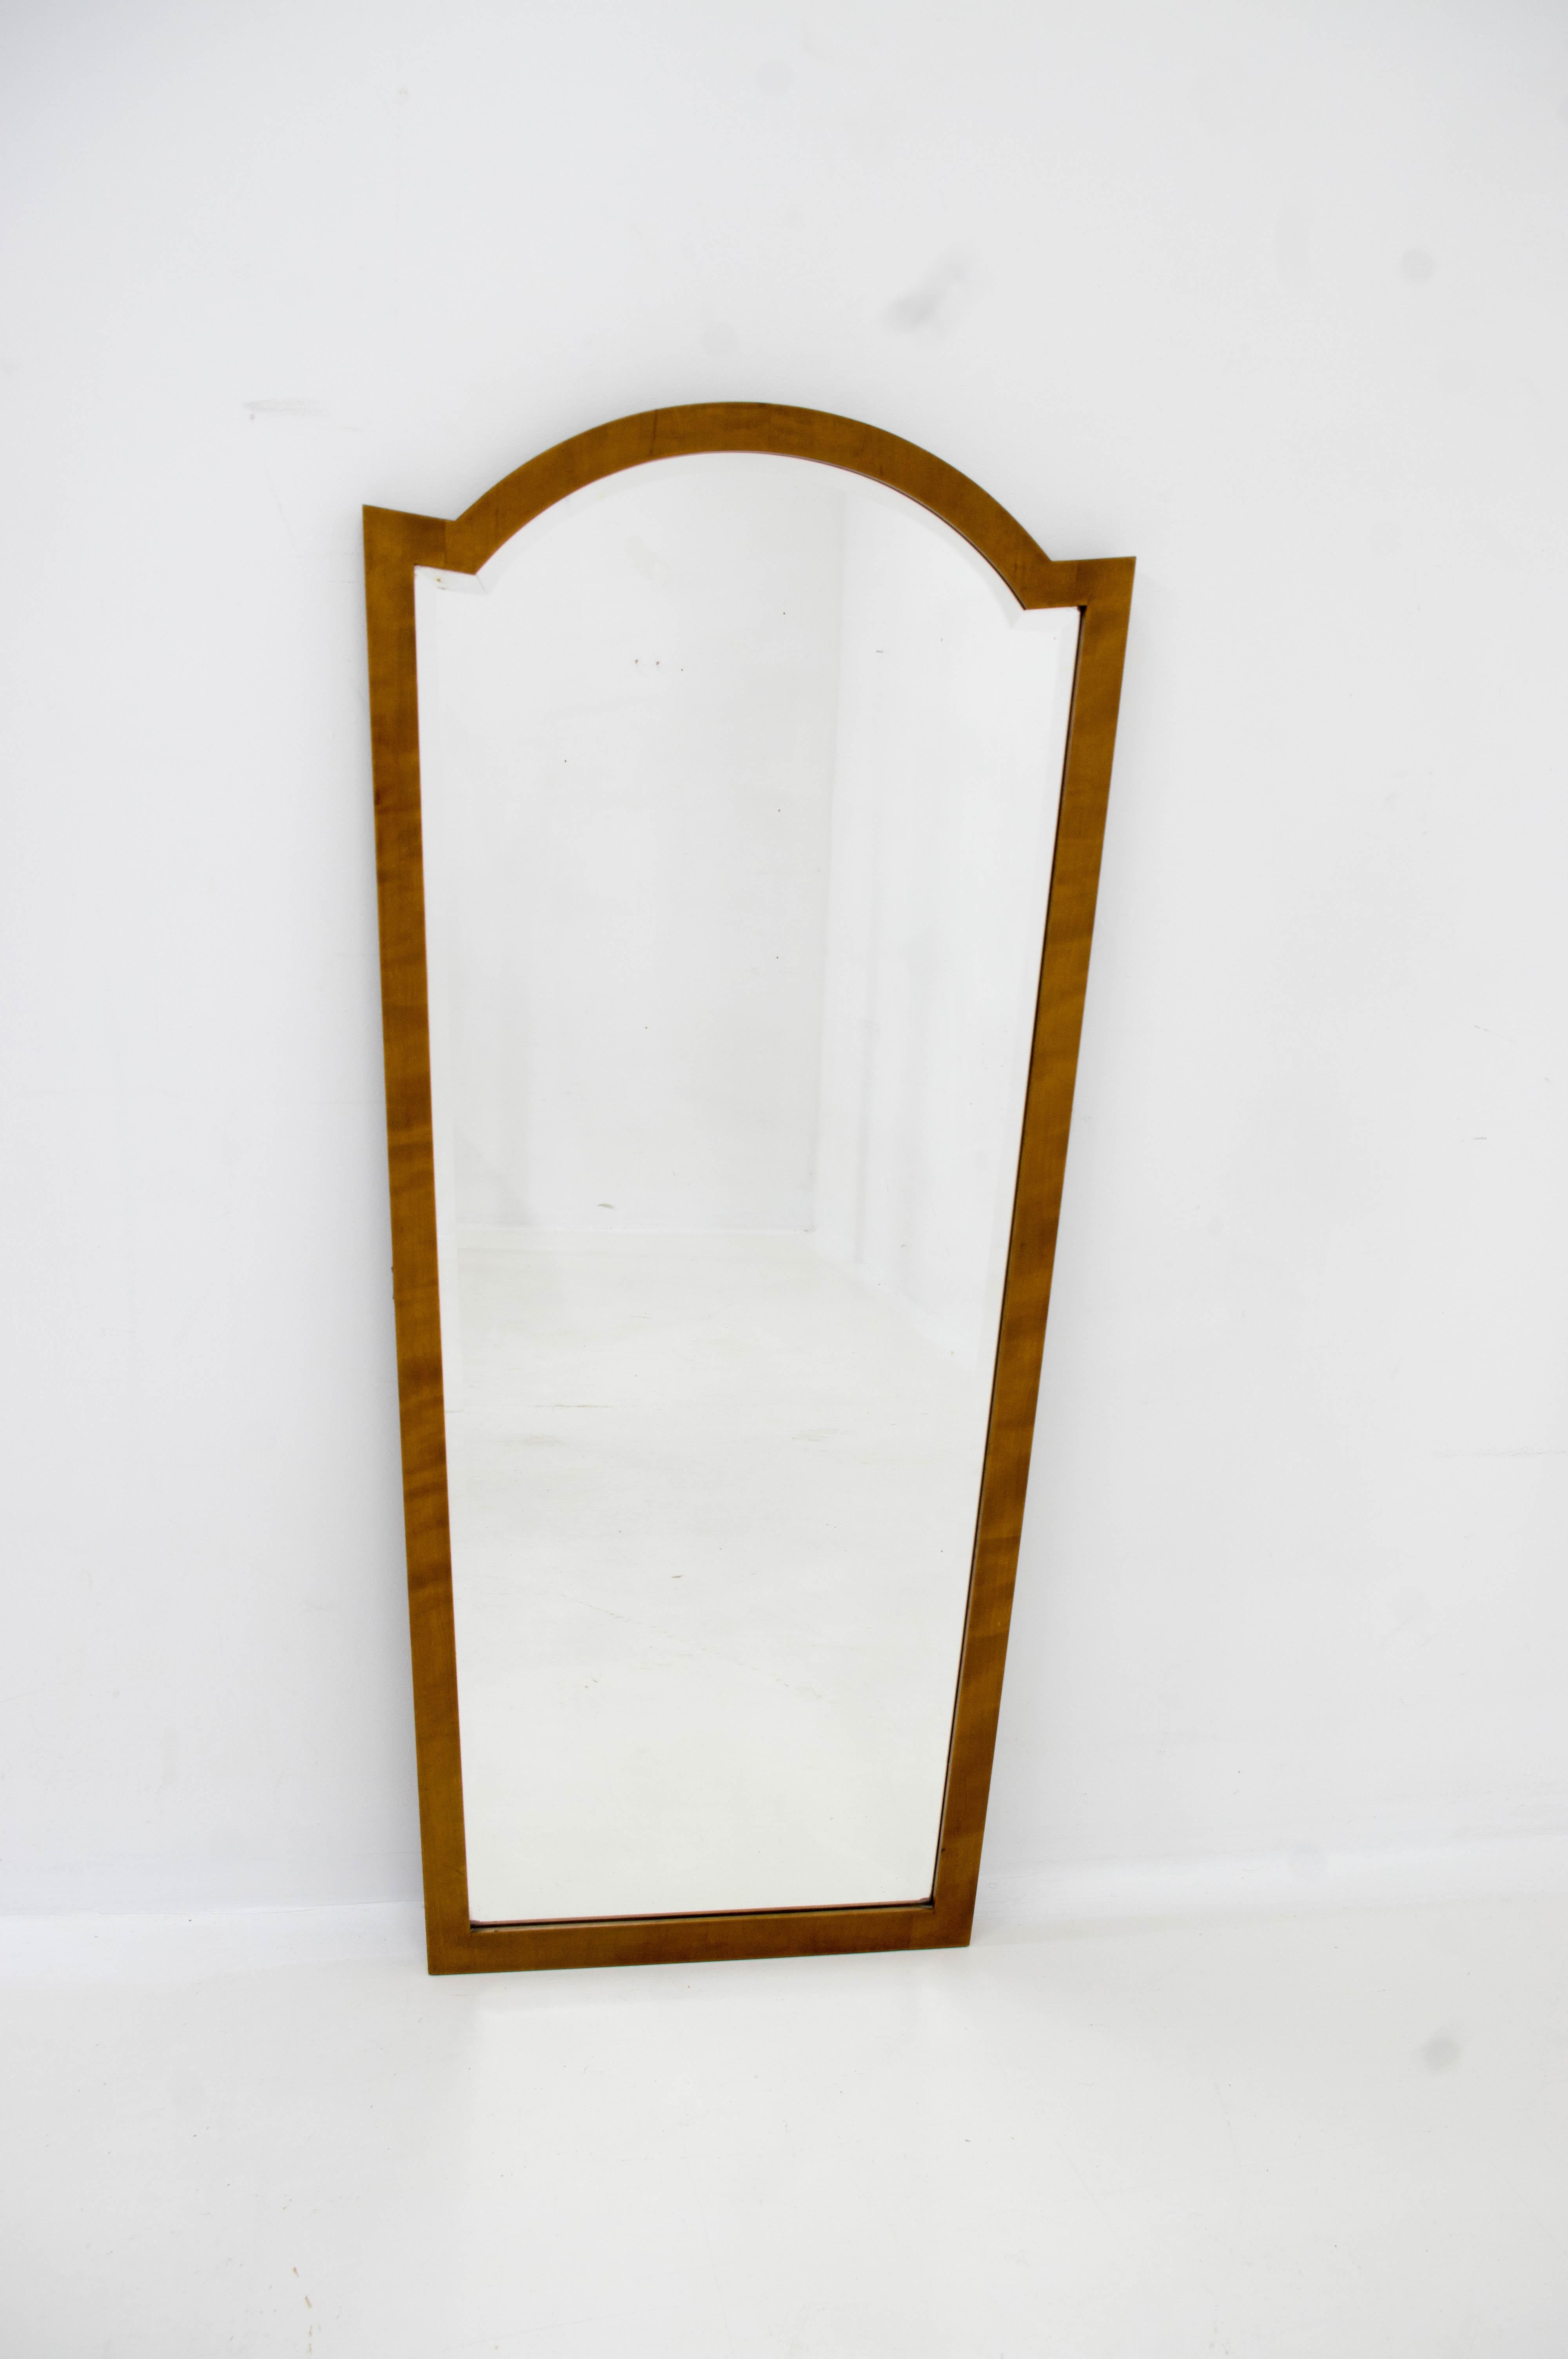 Wall mirror made in 1940s.
Very good original condition.
Shipping quote on request